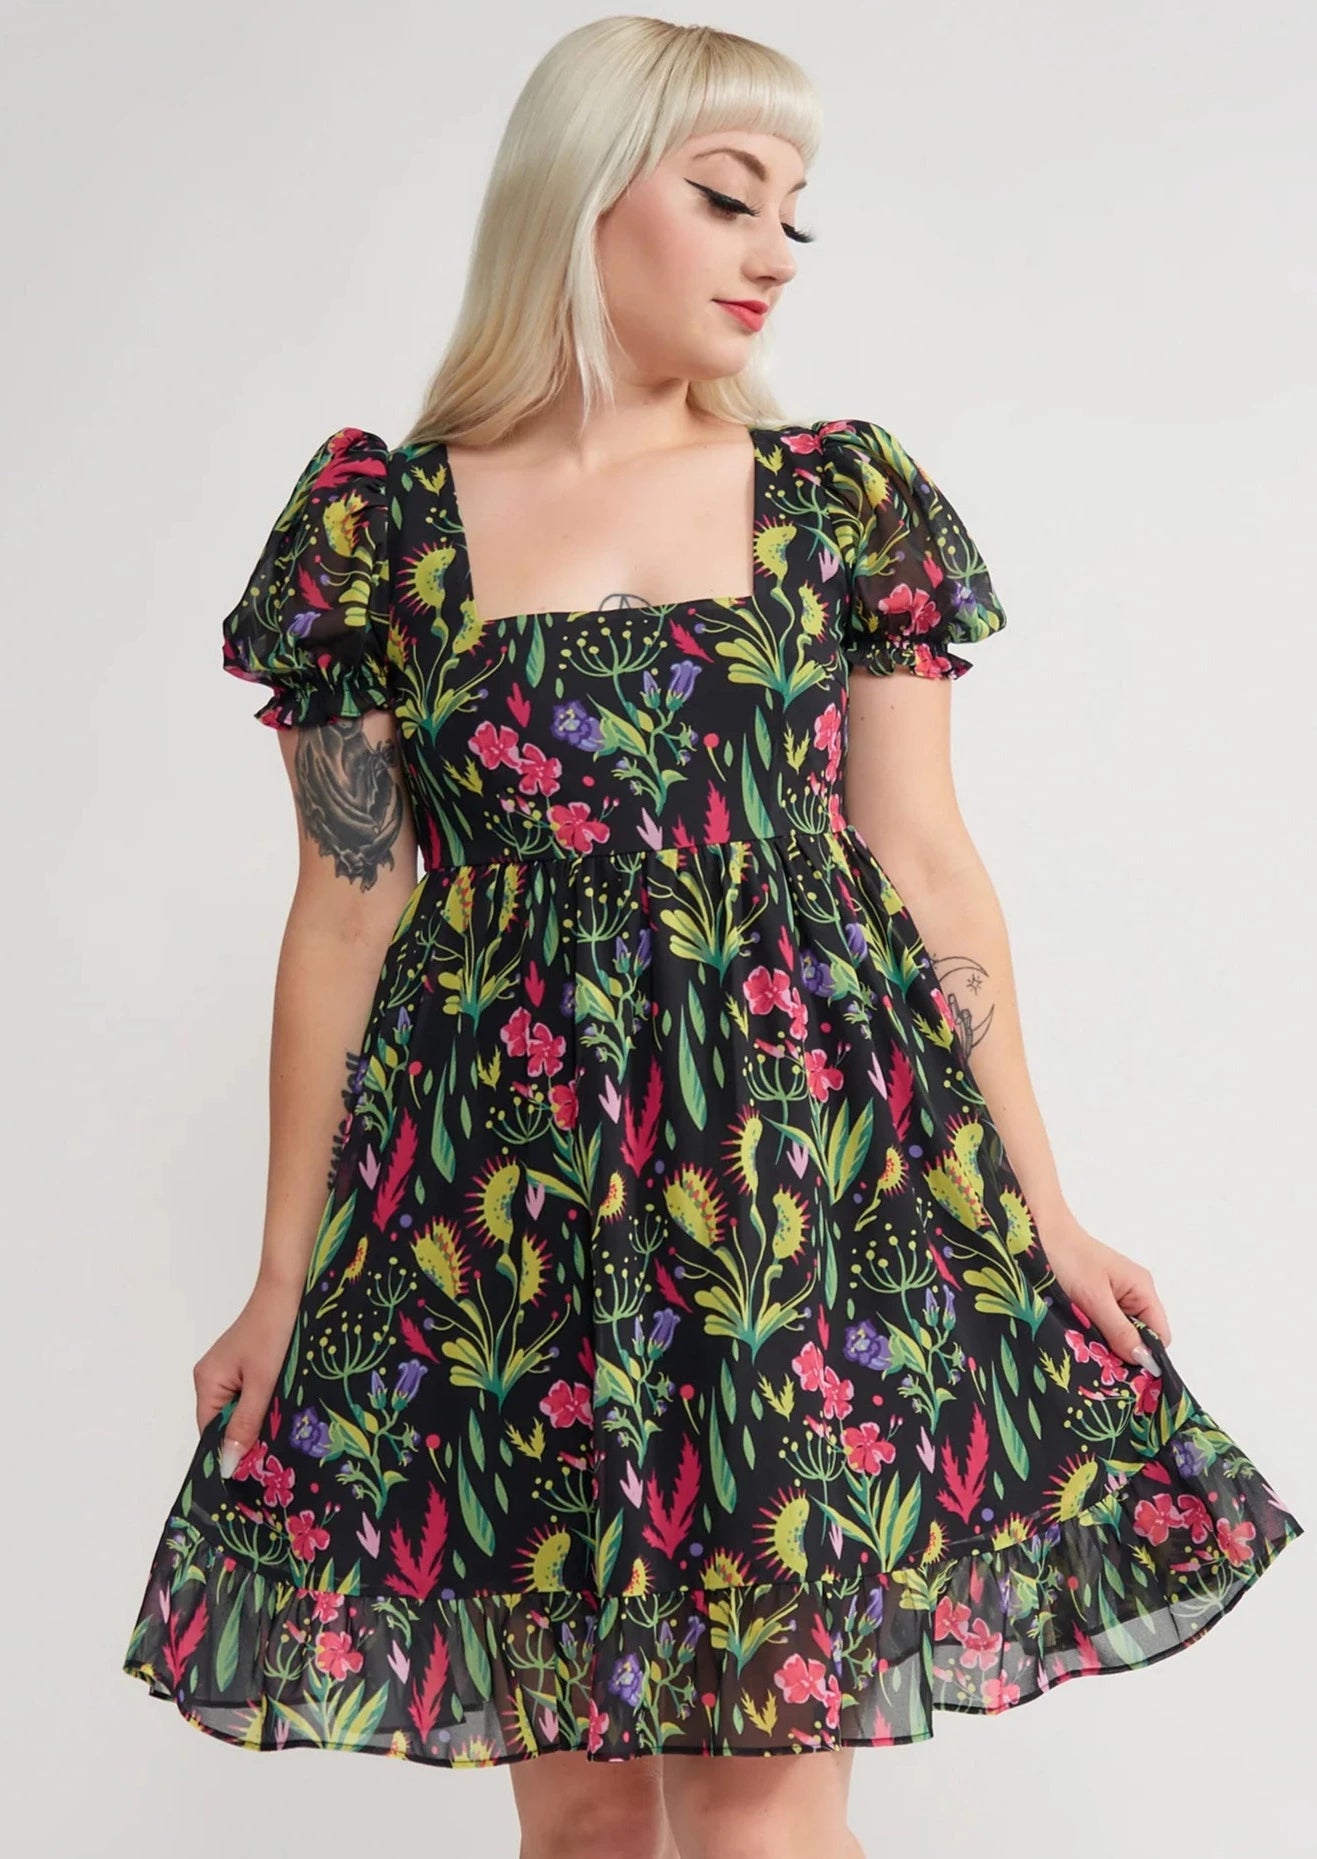 Model wearing a mini dress with a botanical pattern including Venus Flytraps on a black background. It has a square neckline, slightly puffed short sleeves, and a full skirt with a ruffled hem. Shown from the front in close up